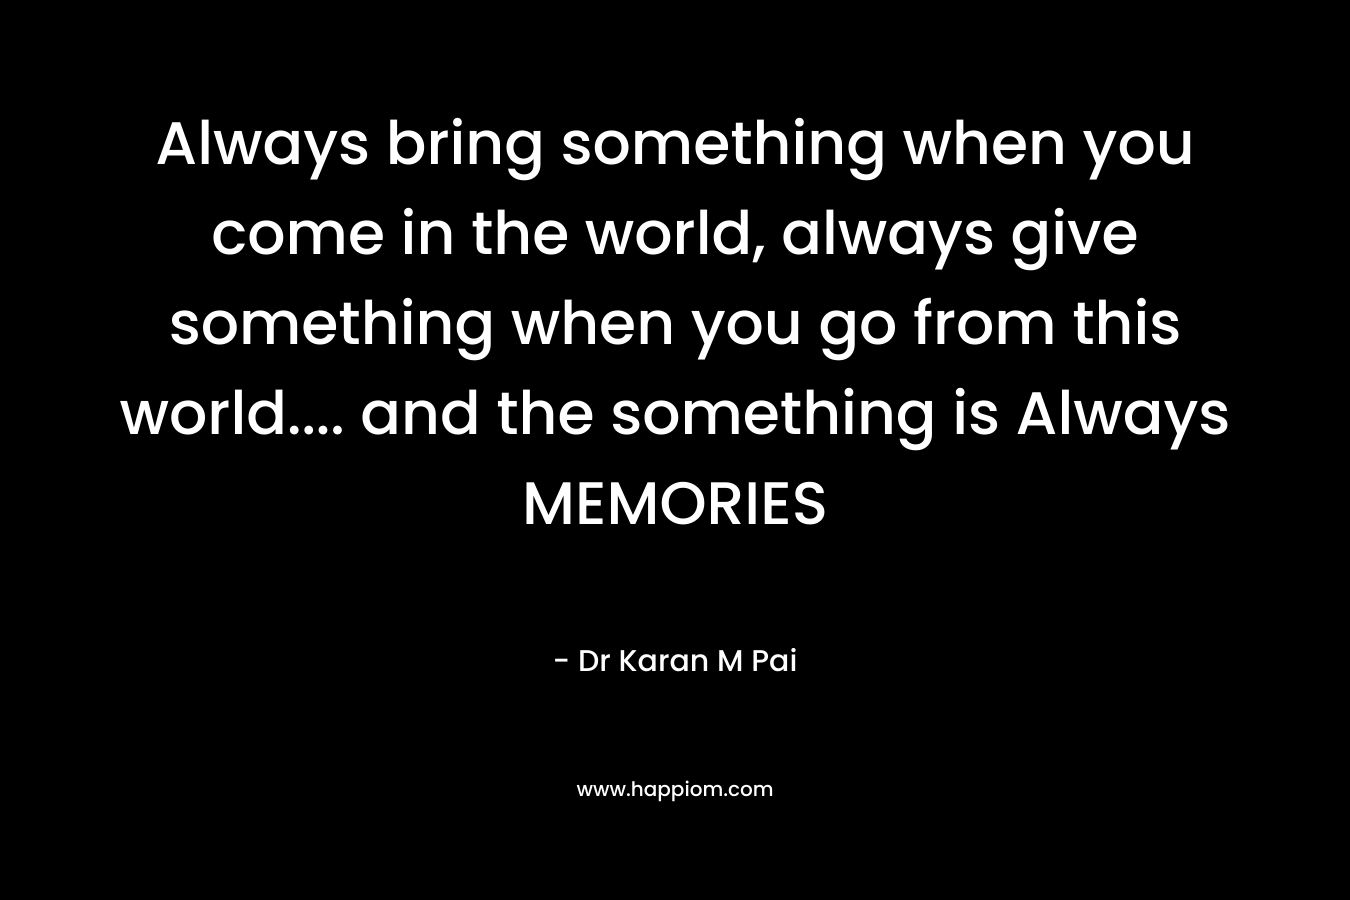 Always bring something when you come in the world, always give something when you go from this world.... and the something is Always MEMORIES